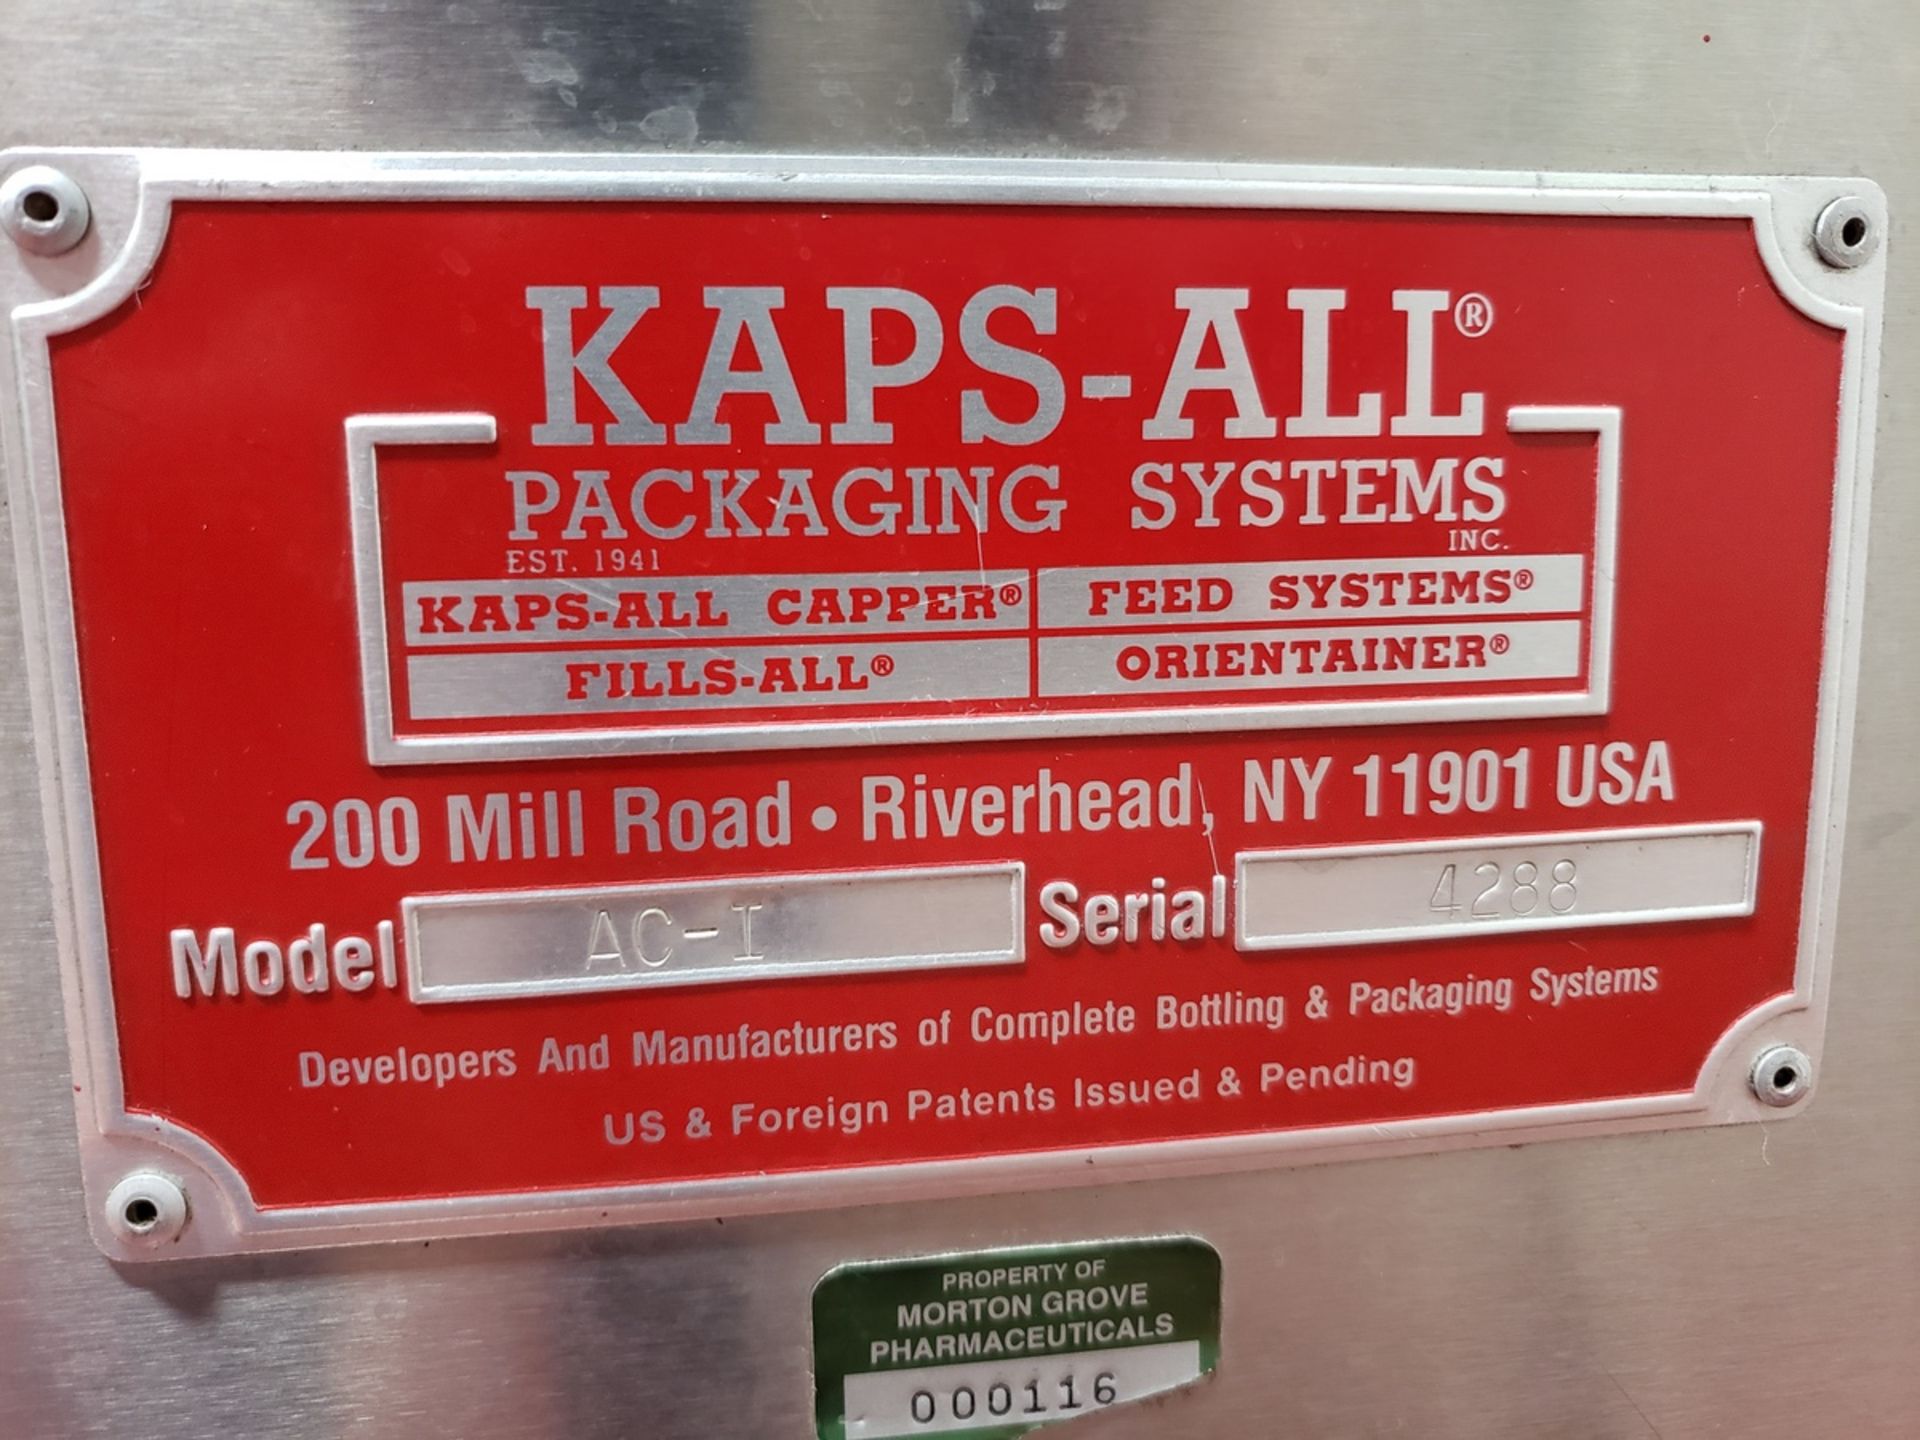 Kaps-All Orientainer, M# AC-1, S/N 4288 - Subj to Bulk | Rig Fee $500 - Image 2 of 3